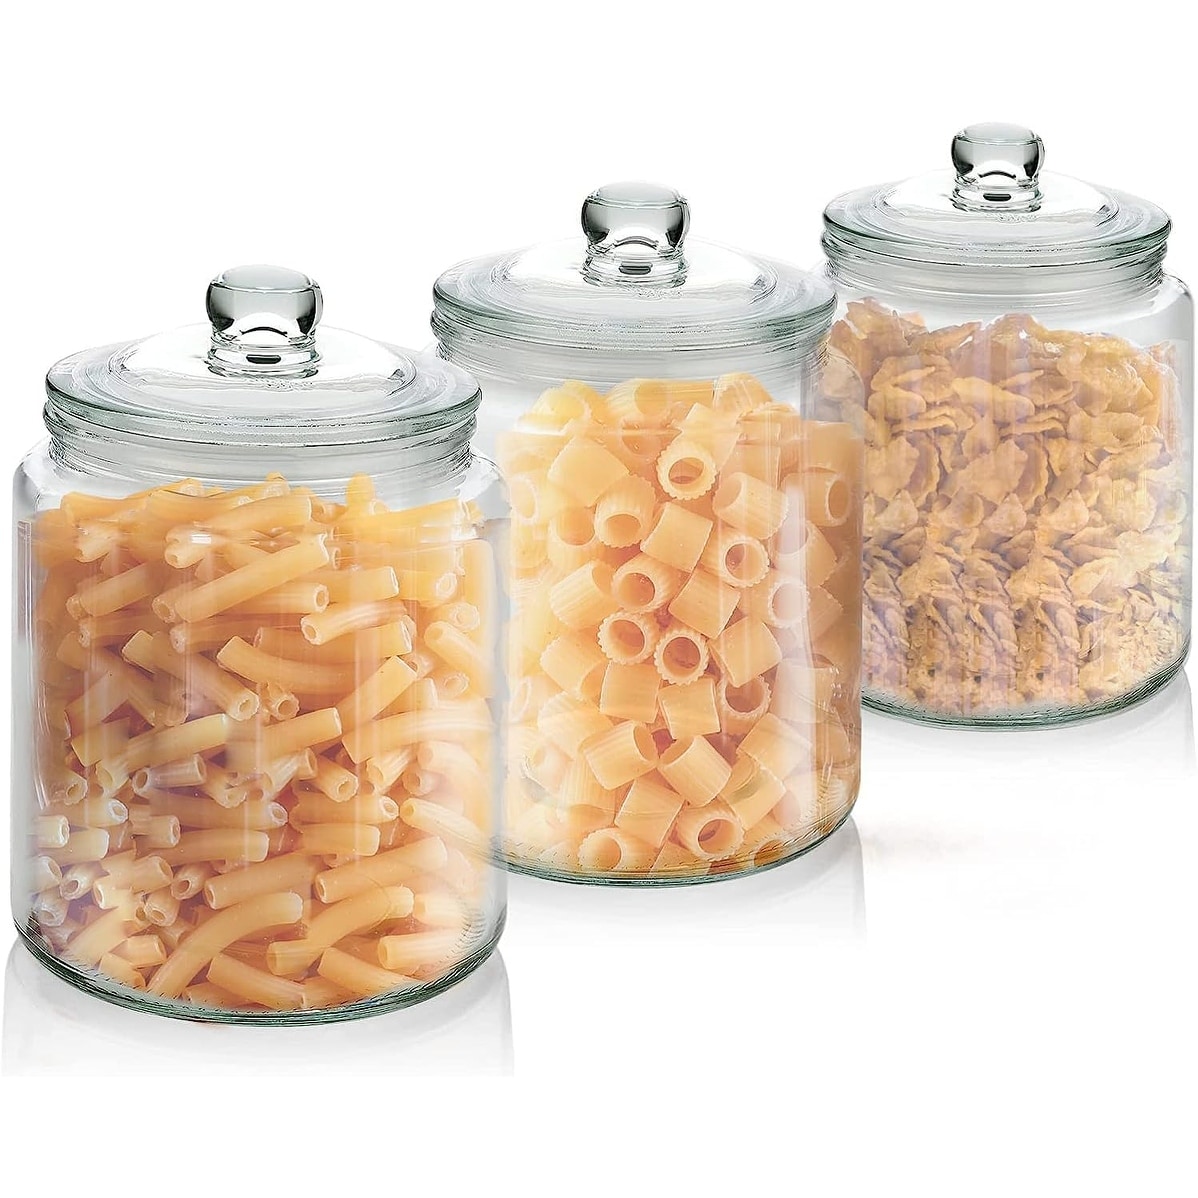 https://ak1.ostkcdn.com/images/products/is/images/direct/c2fbdfd8a103880352d1101f08efce2fc75dd36f/Glass-Jar-with-Lid-%7C-Clear-Airtight-Glass-Storage-Cookie-Jar-for-Flour%2C-Pasta%2C-Candy%2C-Dog-Treats%2C-Snacks-%26-More.jpg